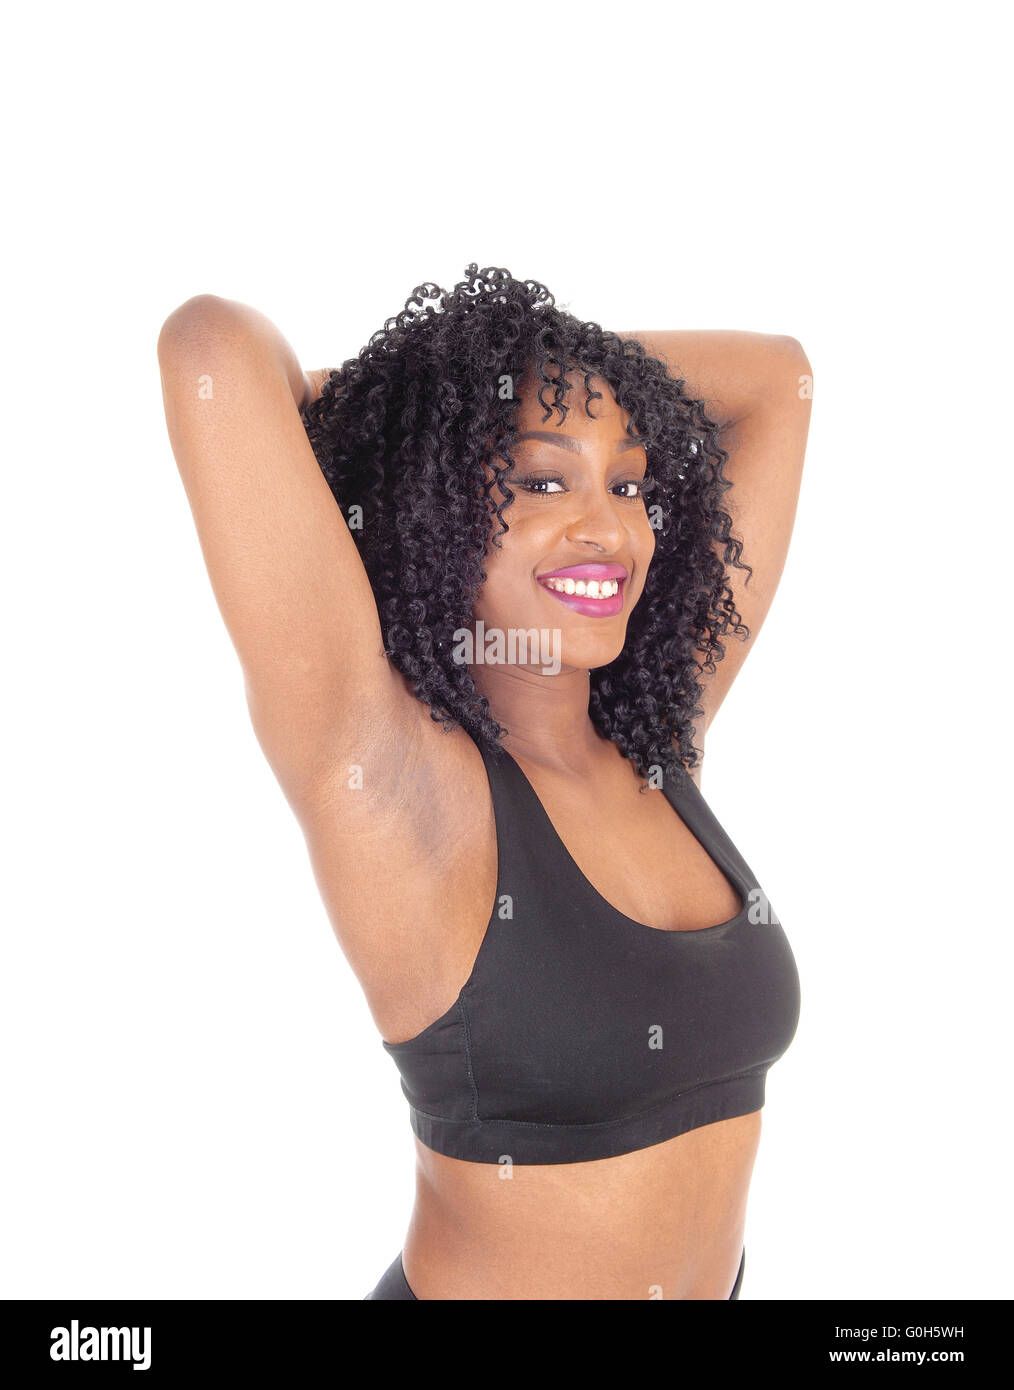 African American Woman in exercice tenue. Banque D'Images